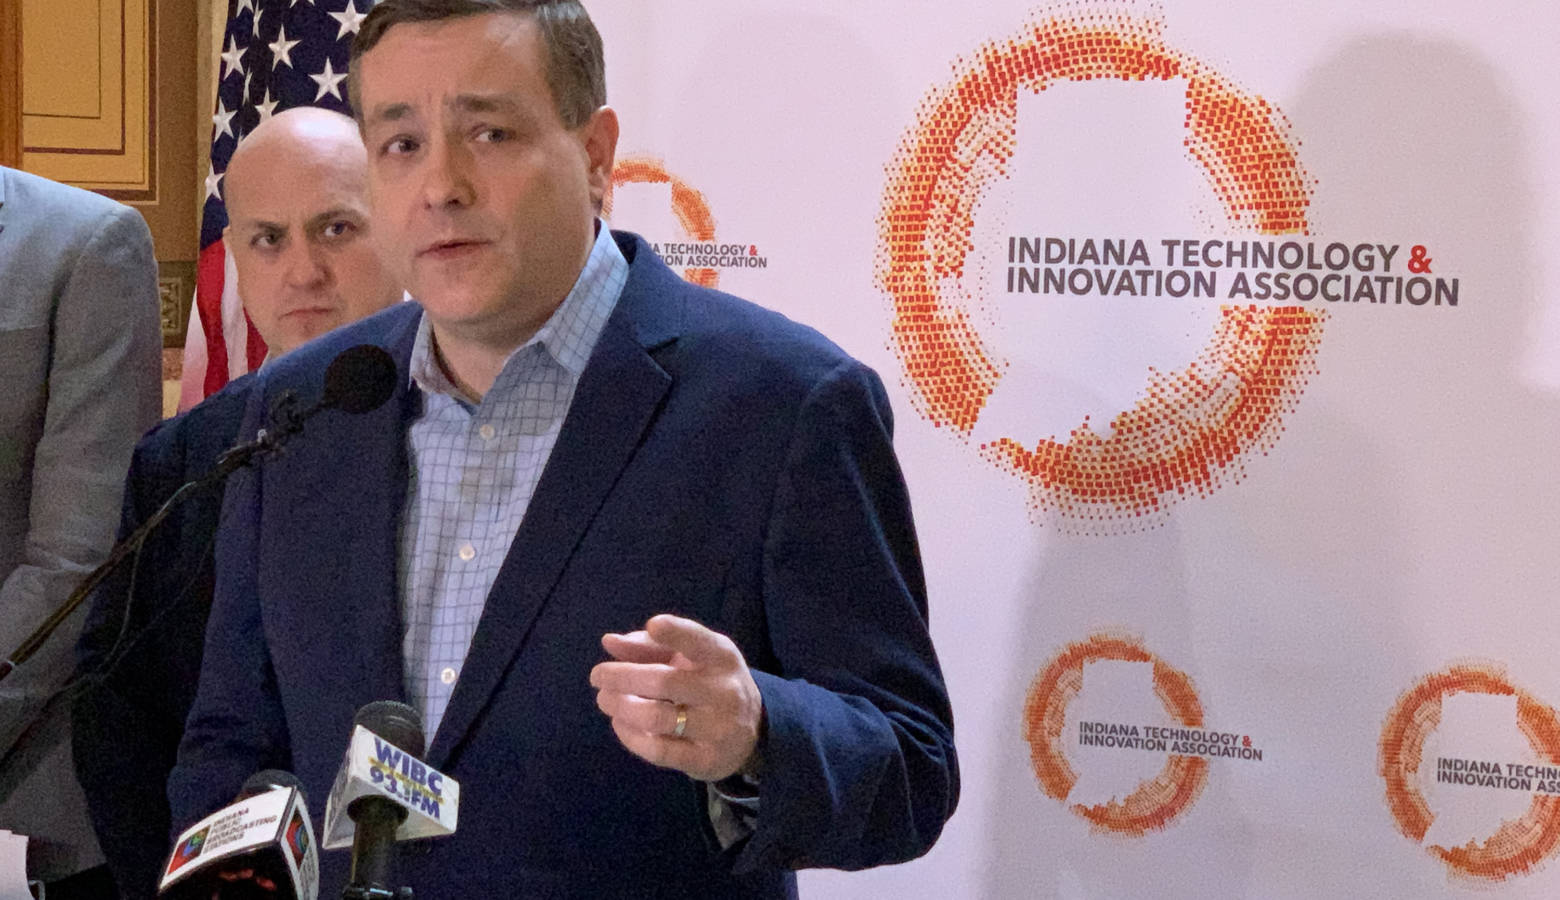 ClearObject CEO John McDonald is a board member of the Indiana Technology and Innovation Association. (Brandon Smith/IPB News)